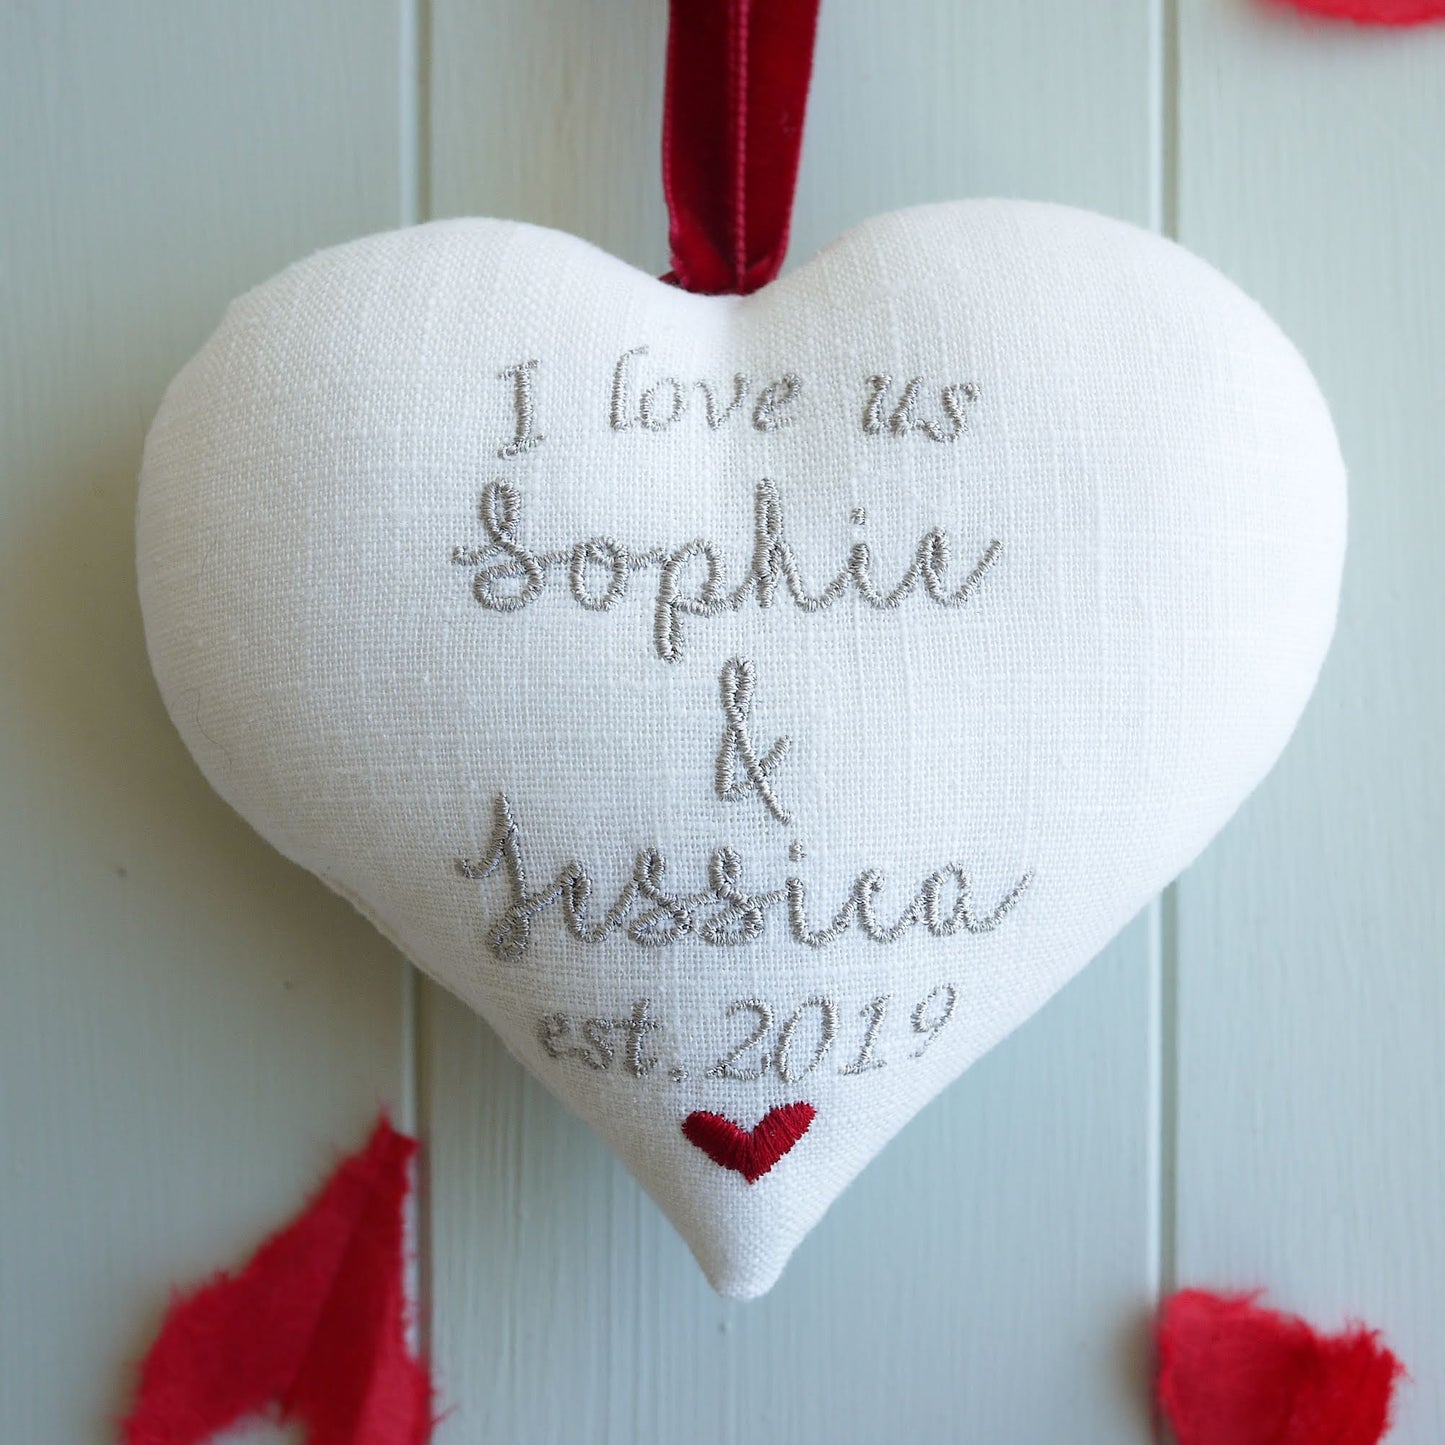 Valentines Day ’I Love Us’ Gift Heart with Tiny Photo Frame Prep collection